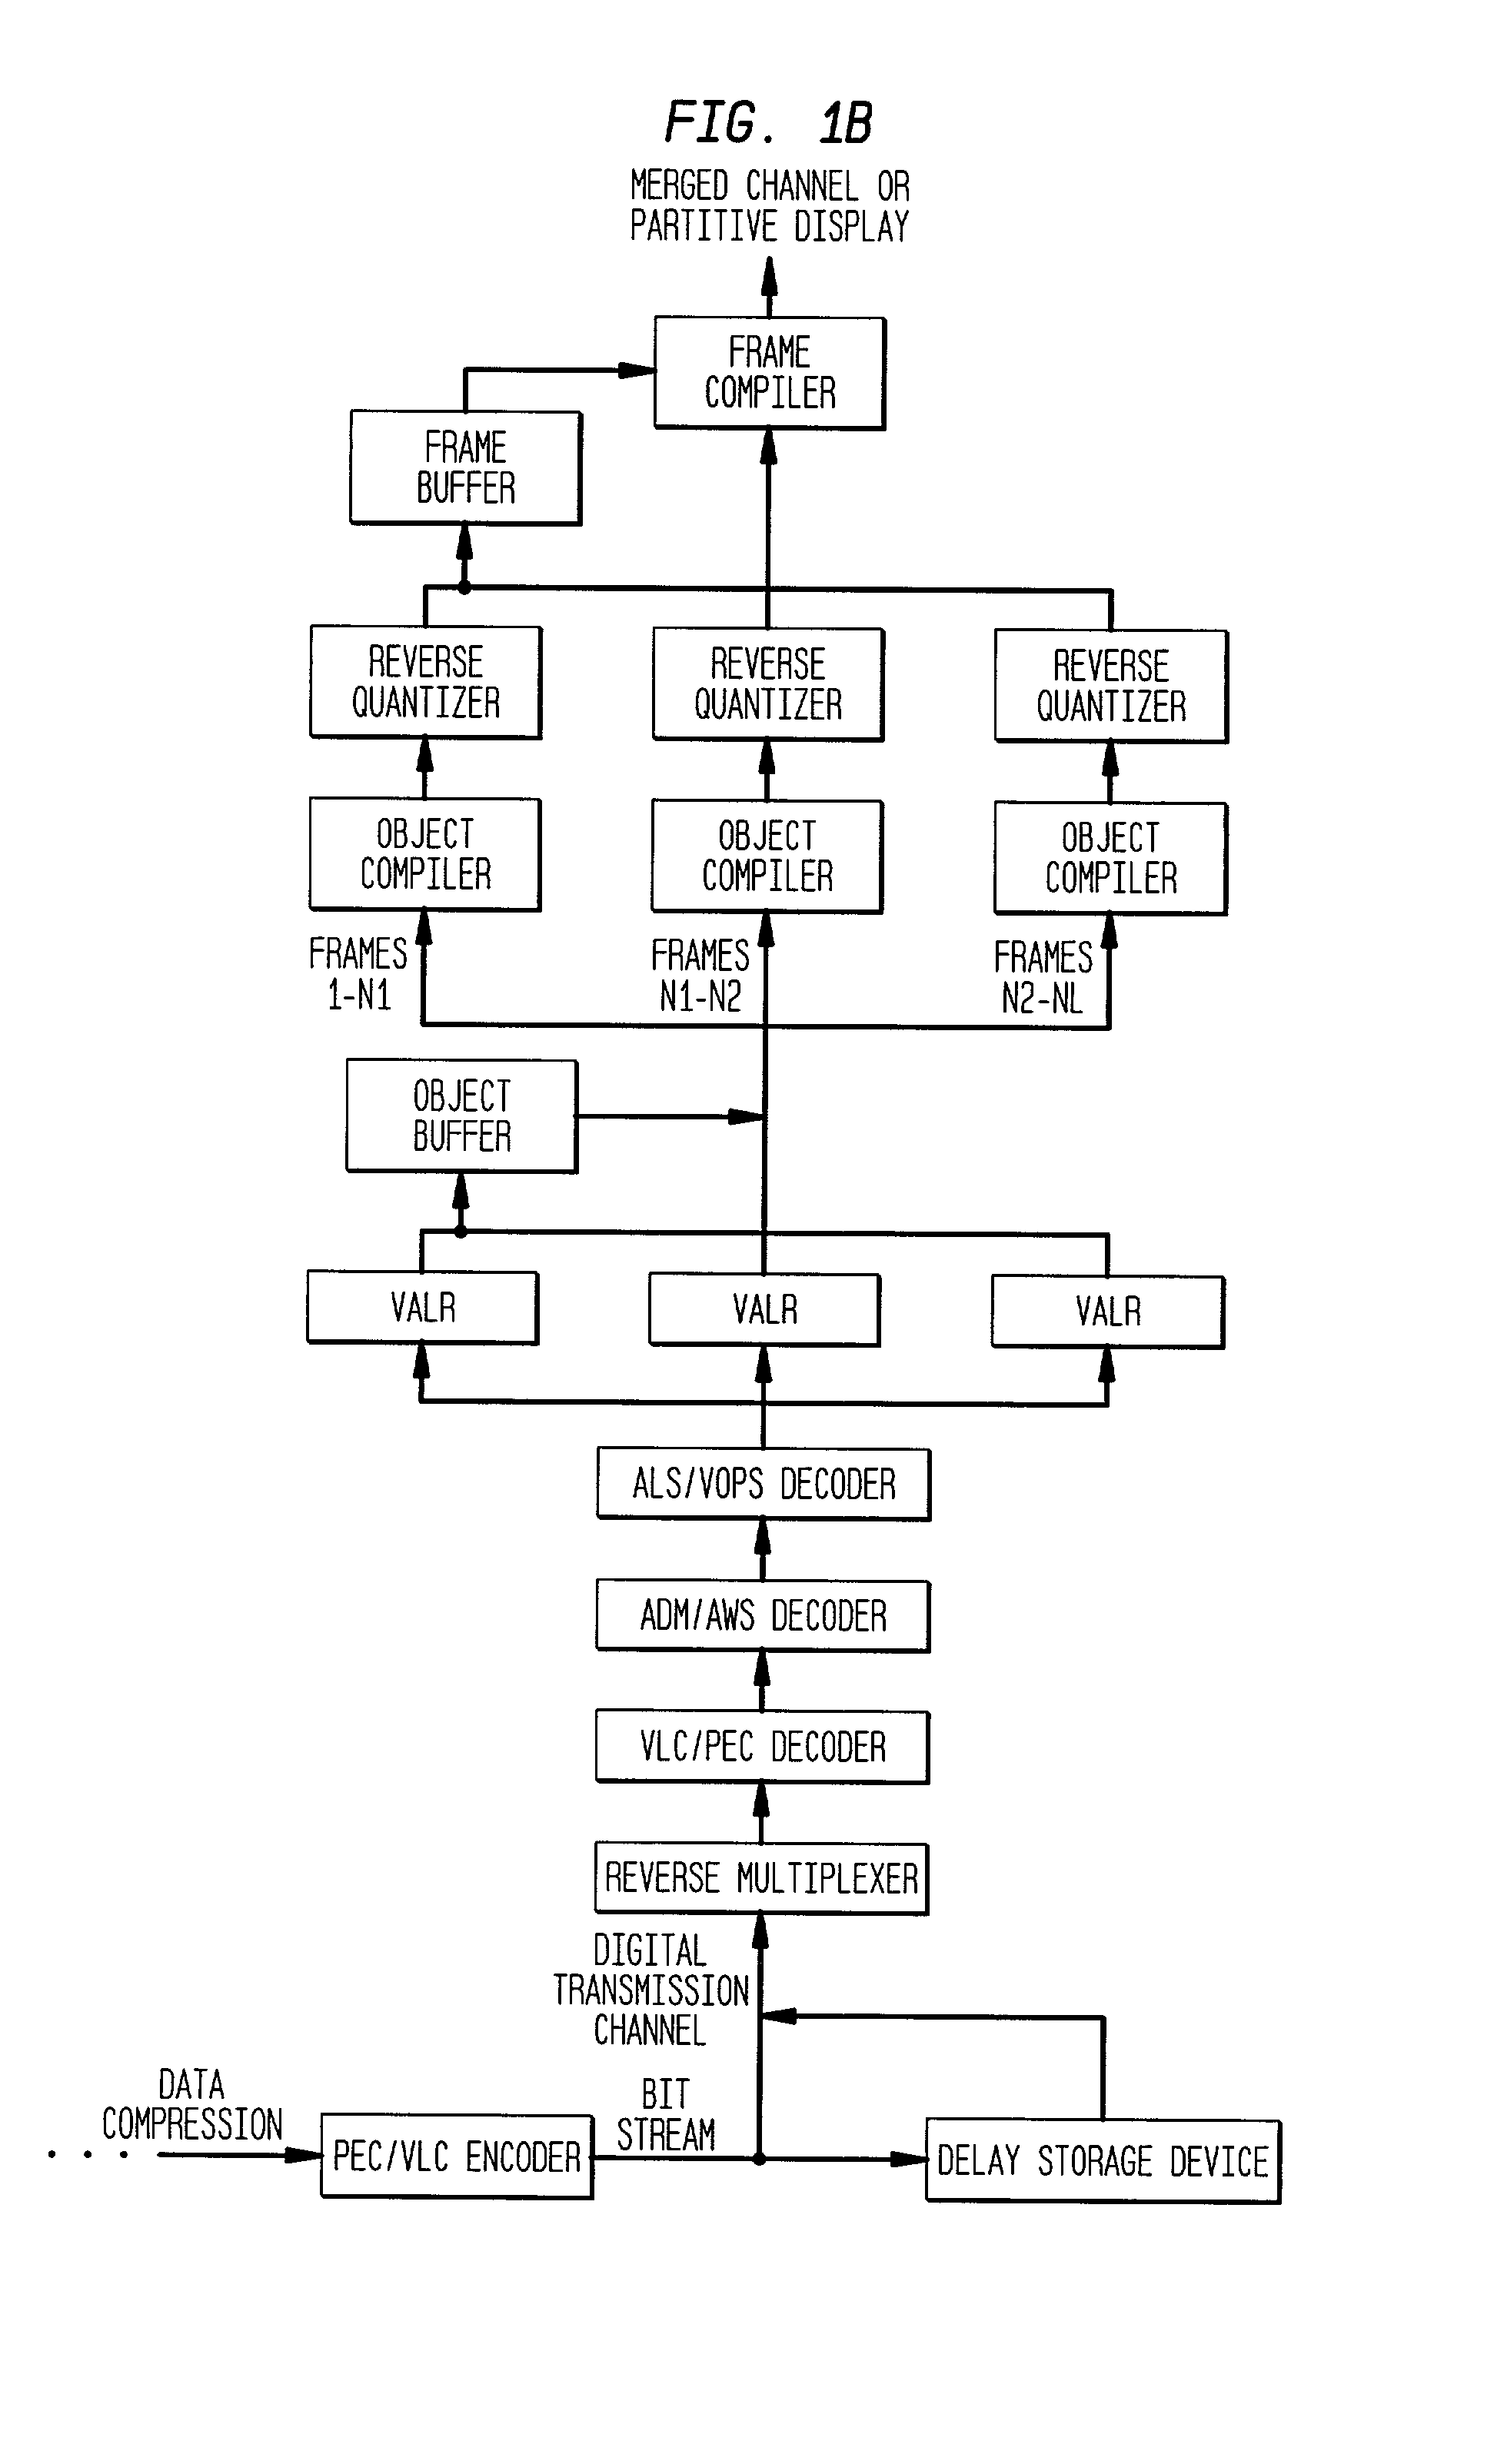 System and method for transmitting a broadcast television signal over broadband digital transmission channels